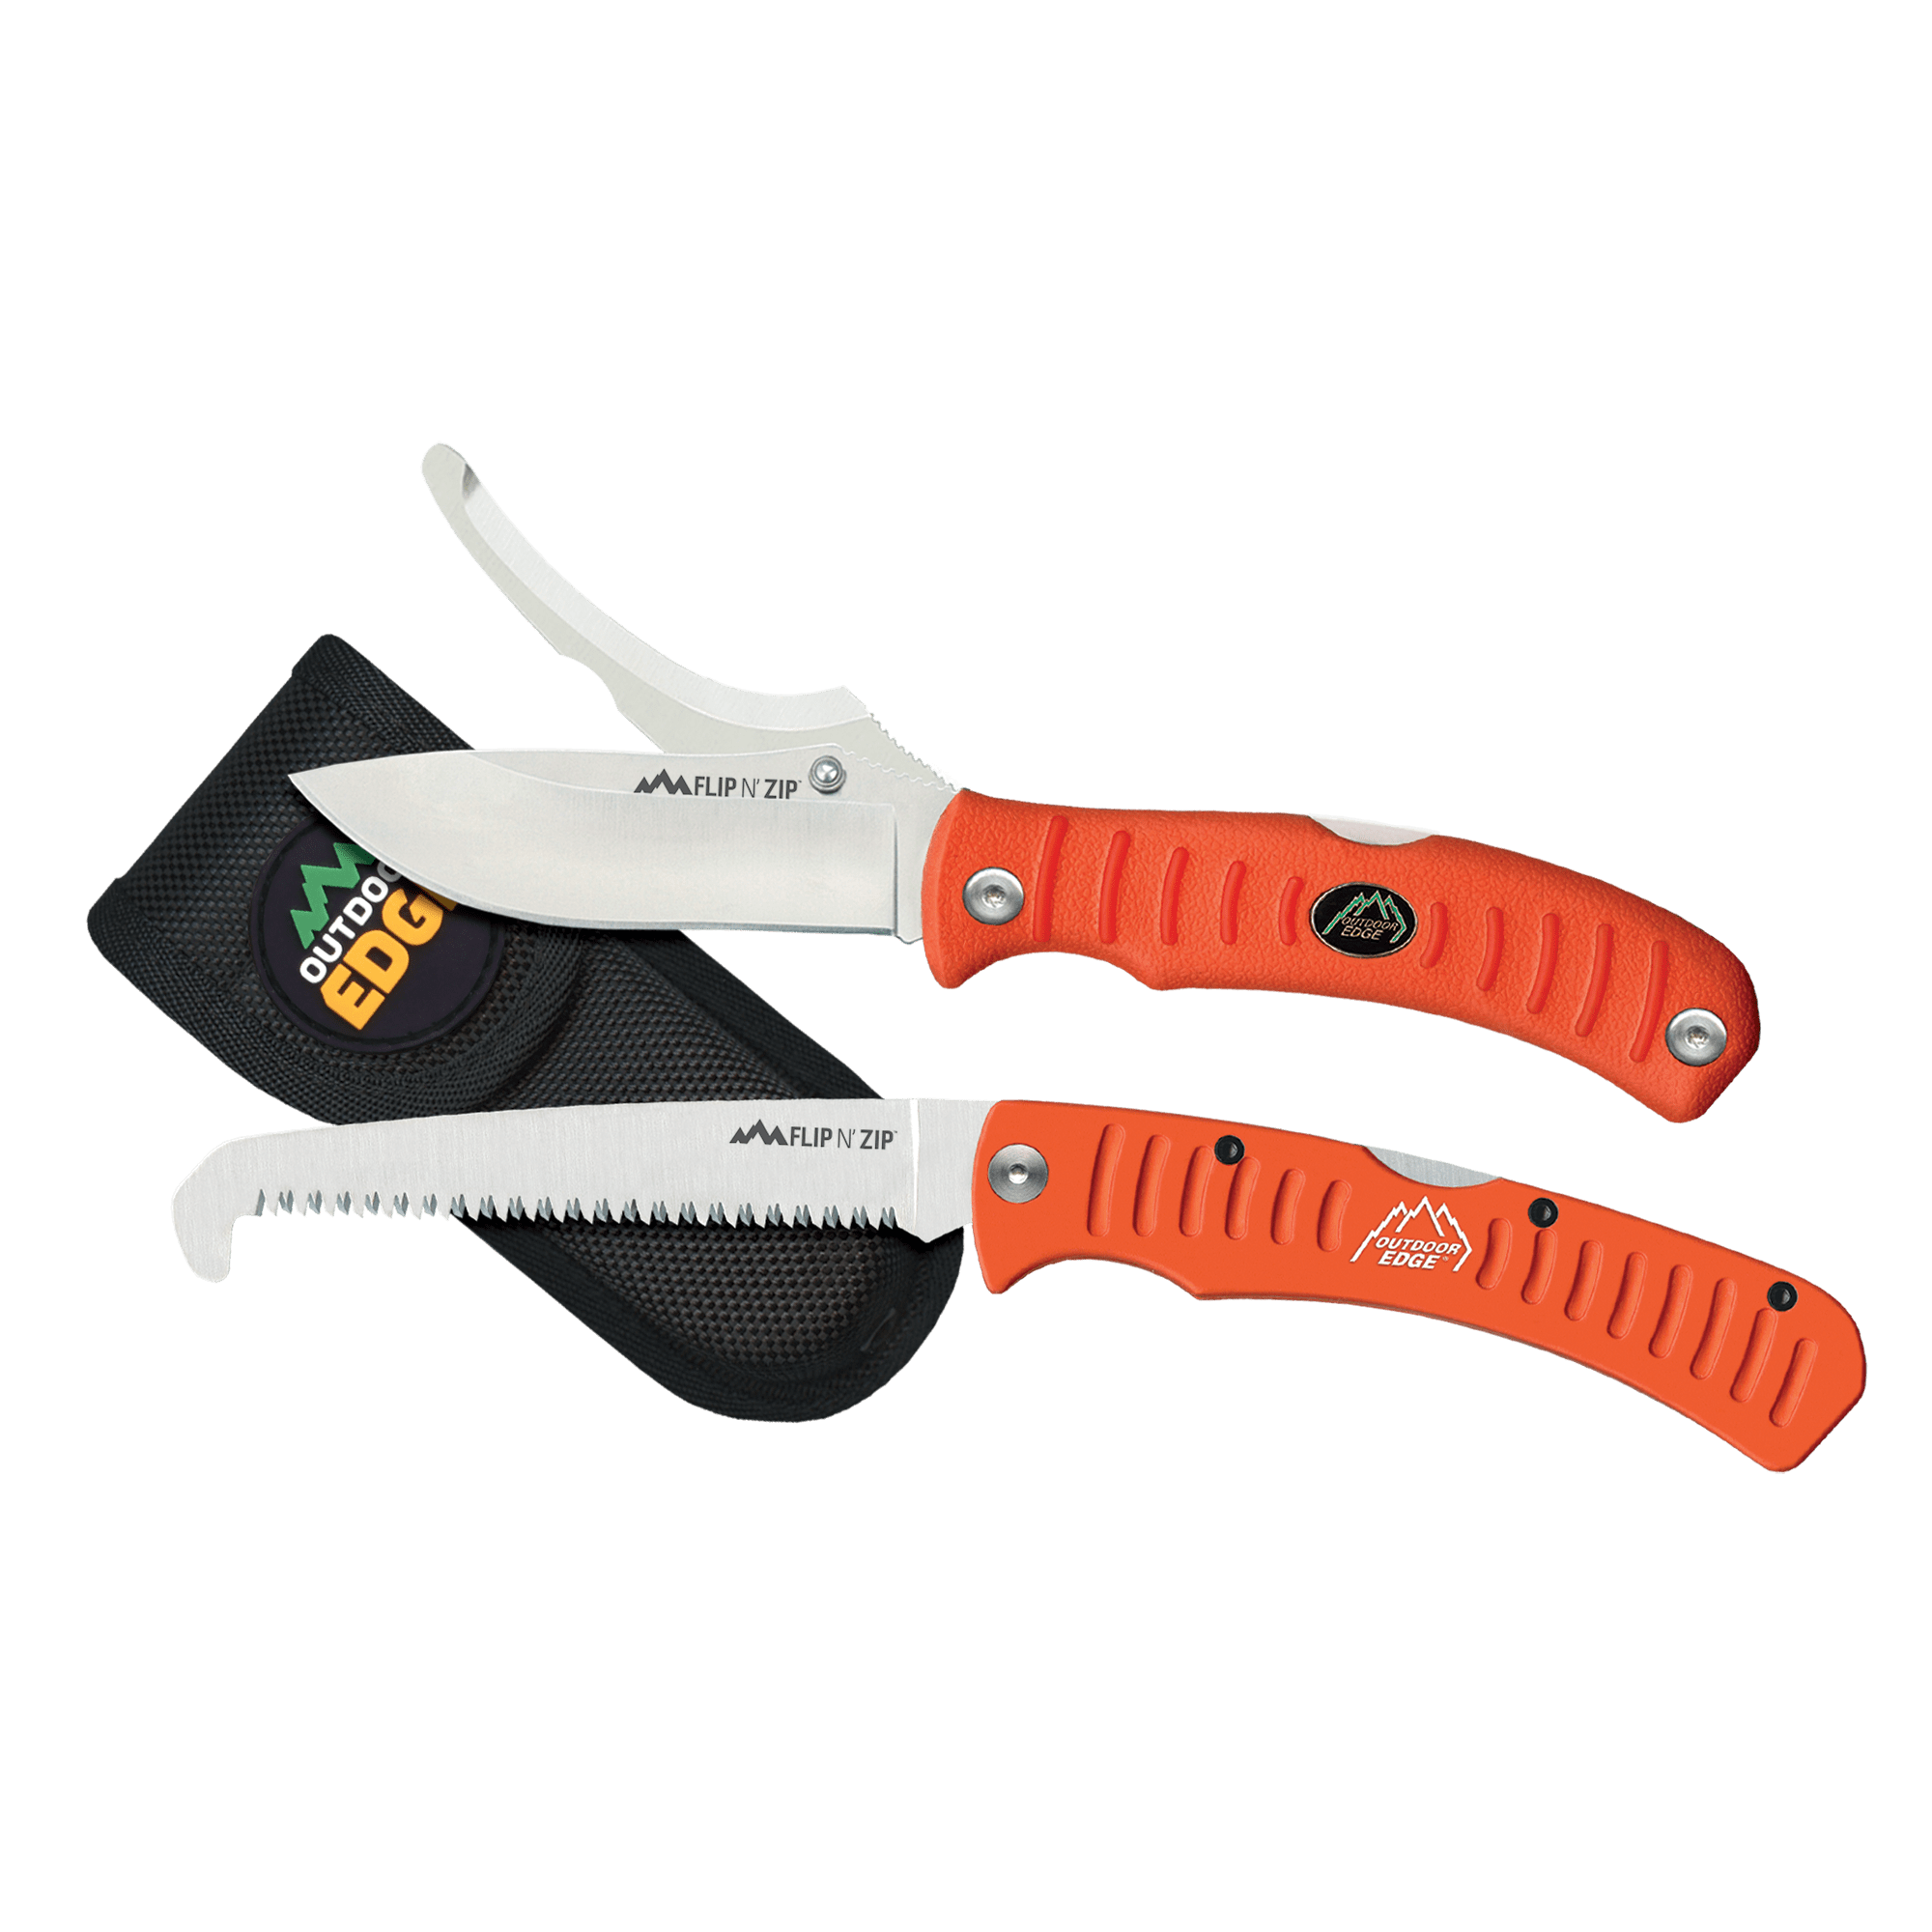 Outdoor Edge Flip n' Zip Combo Skinning Knife and Saw Product Photo